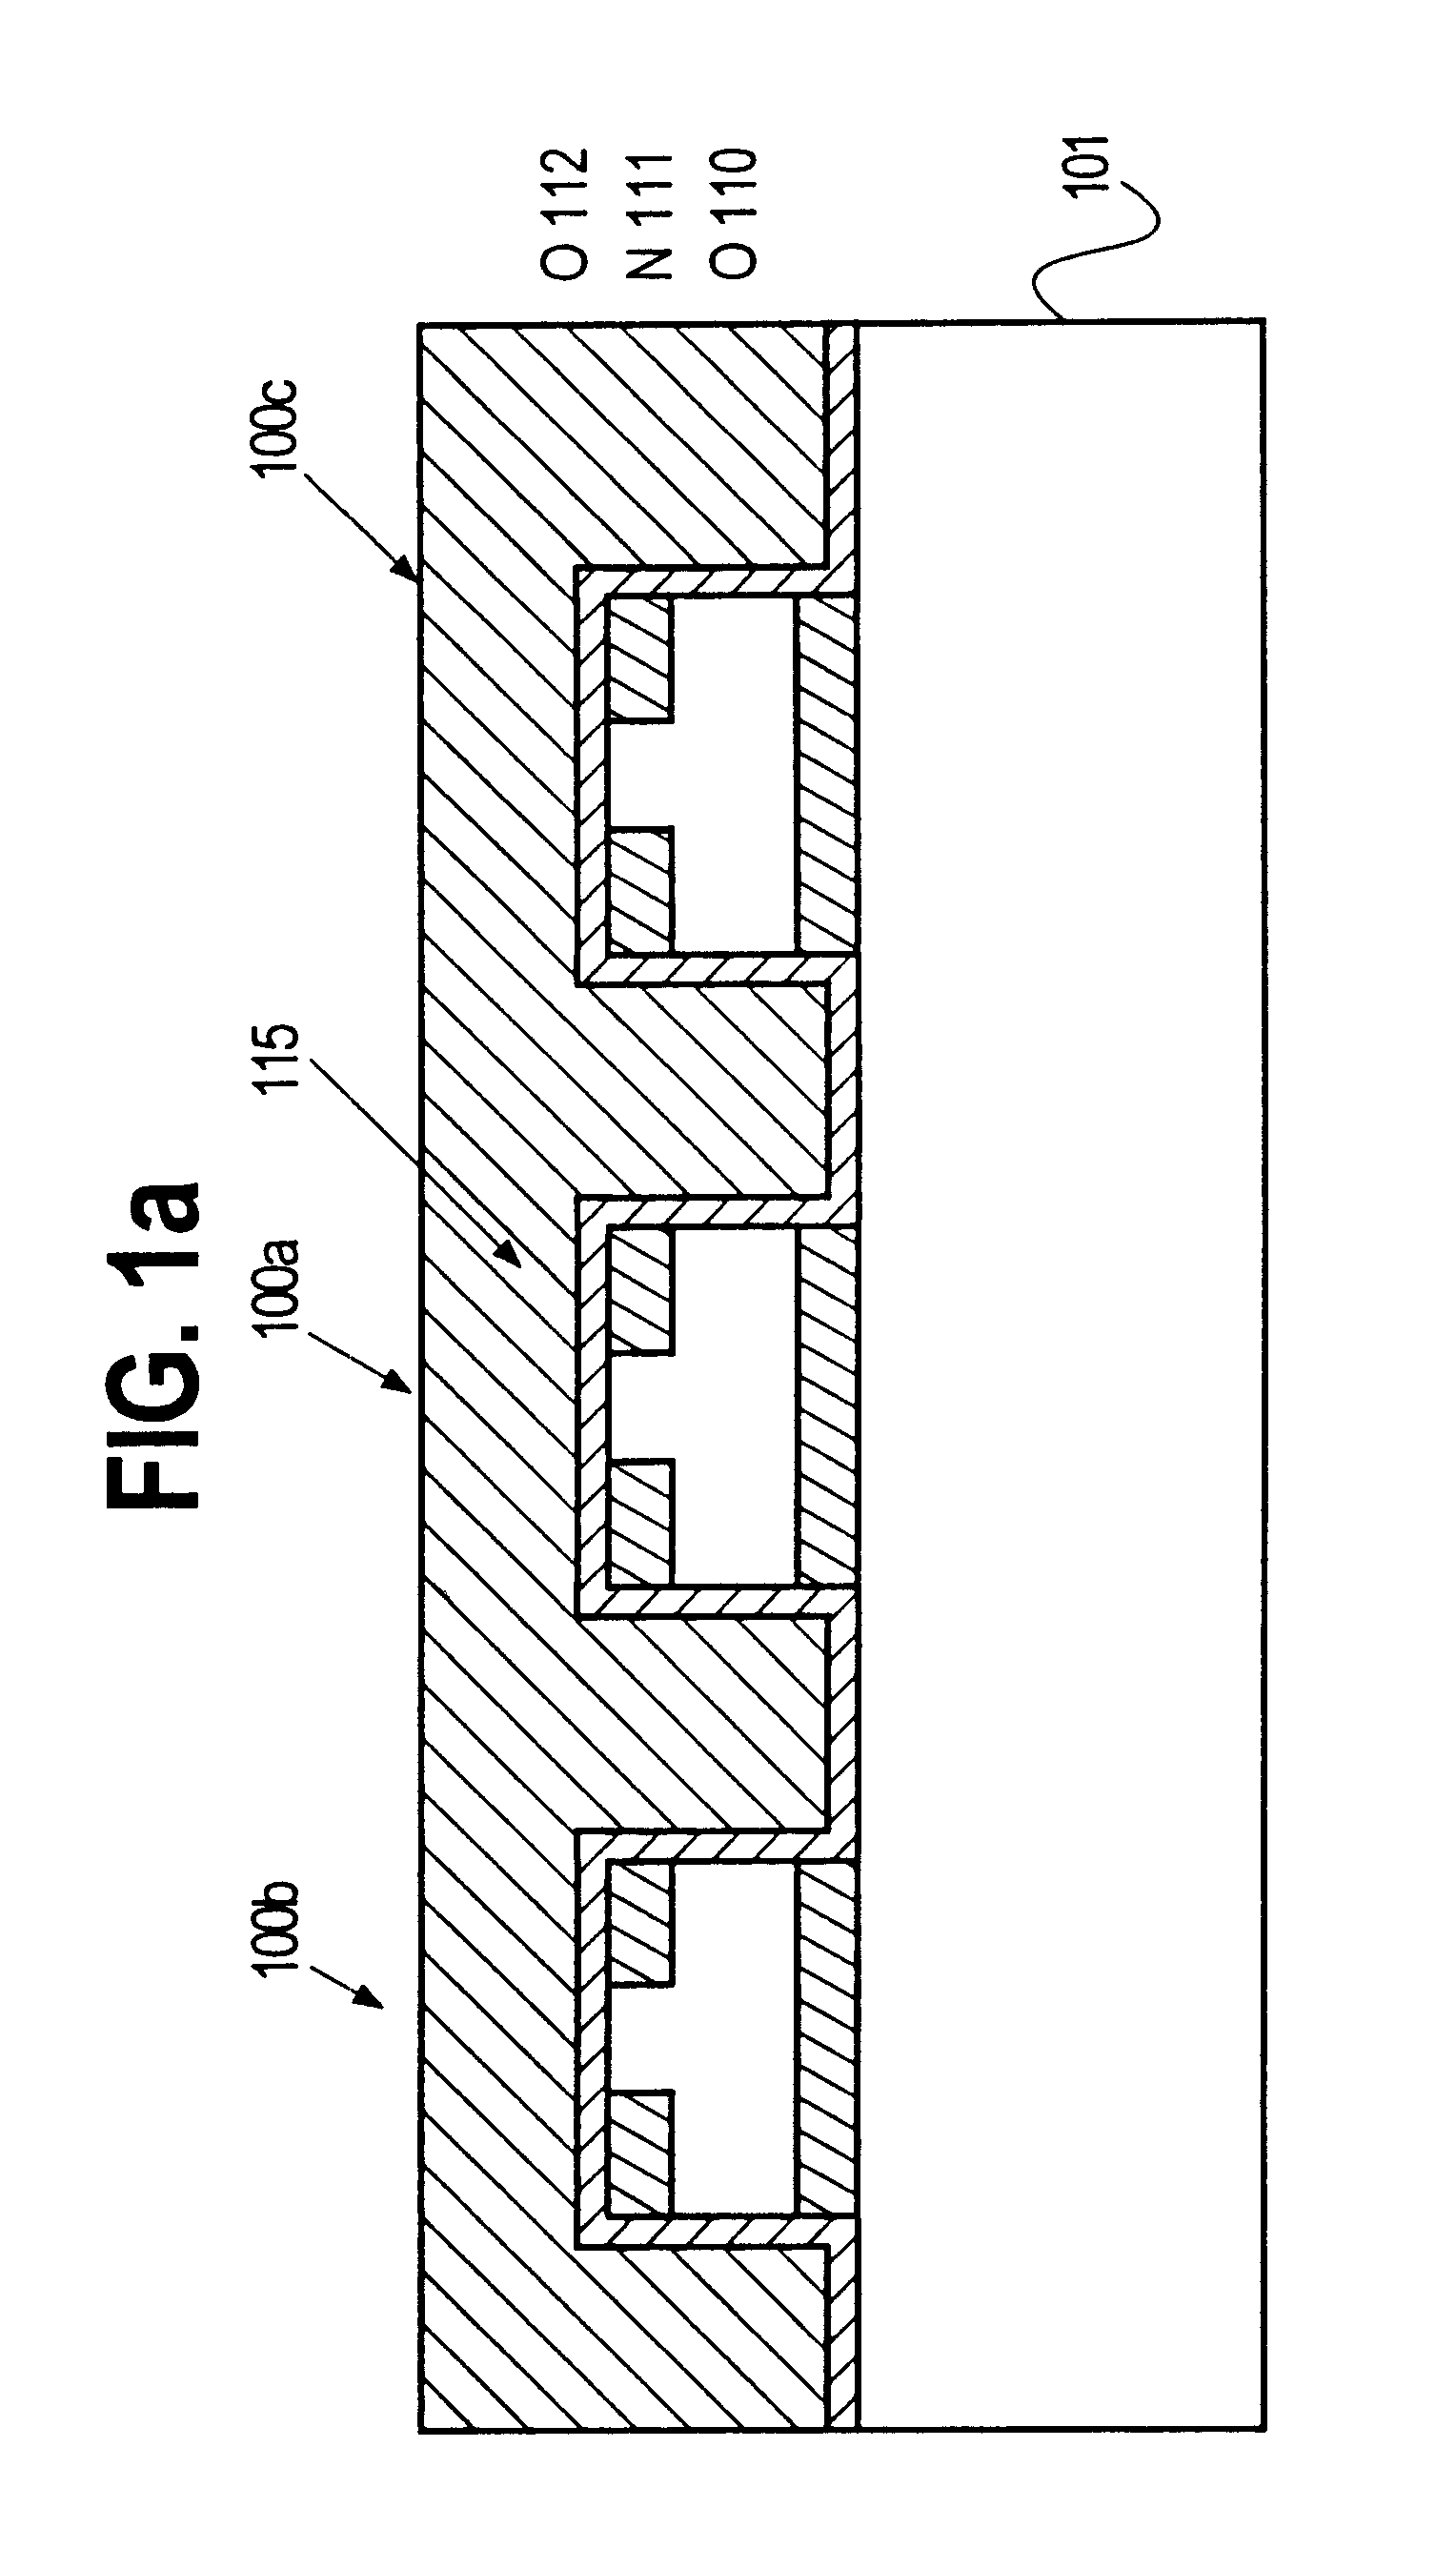 8 bit per cell non-volatile semiconductor memory structure utilizing trench technology and dielectric floating gate